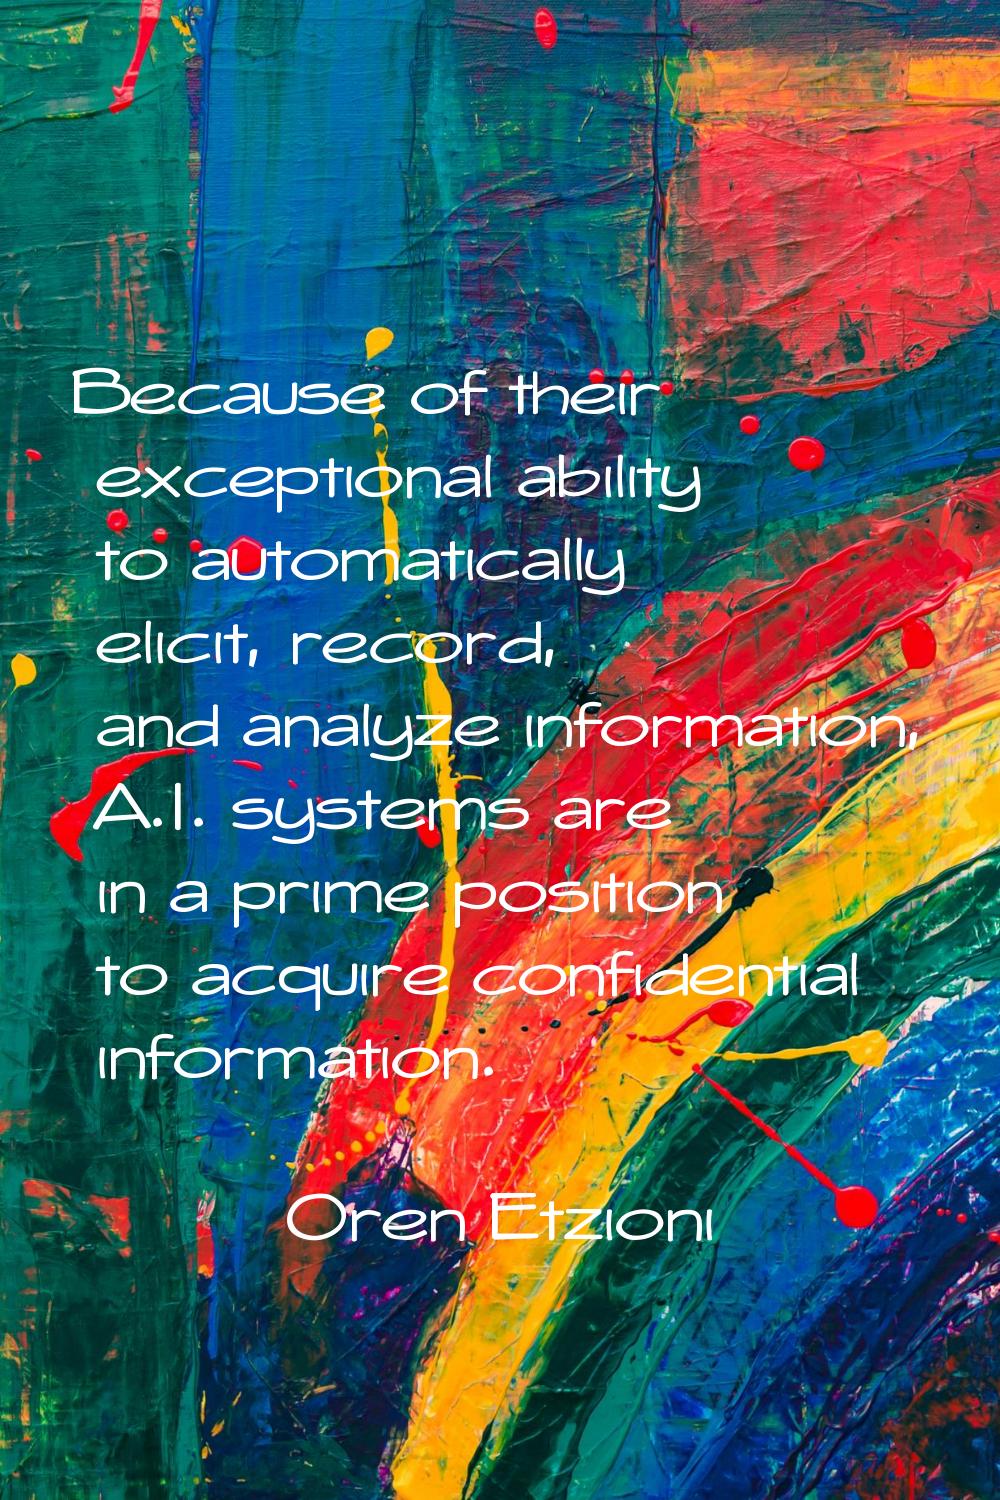 Because of their exceptional ability to automatically elicit, record, and analyze information, A.I.